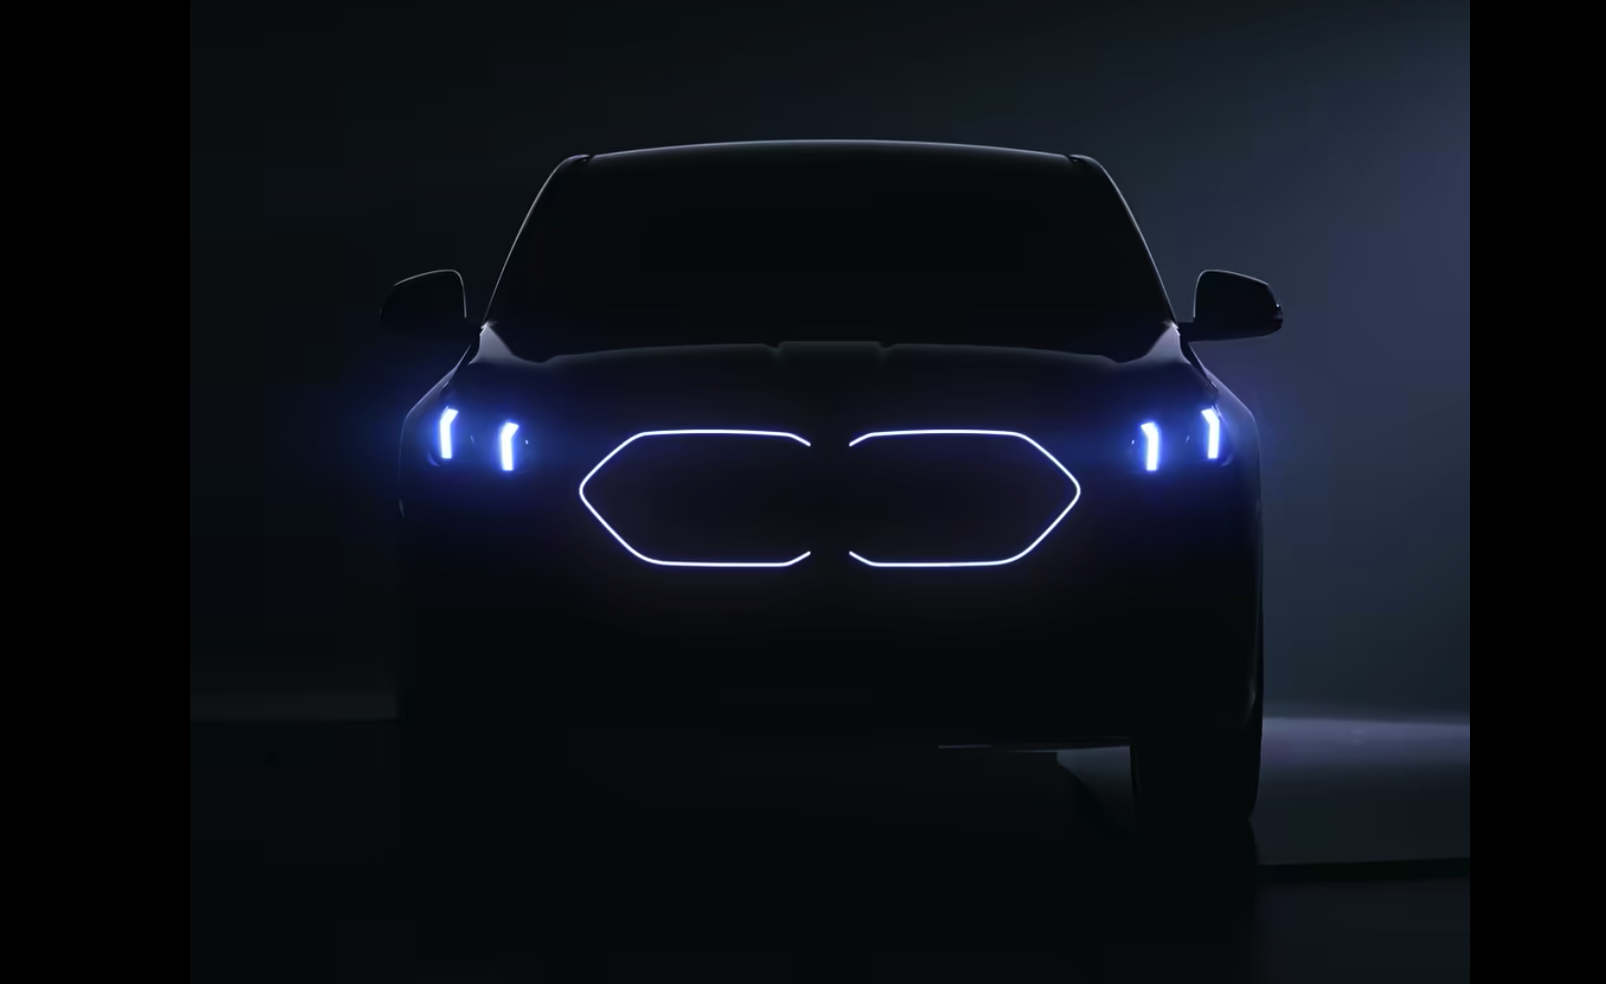 new bmw x2 teases illuminated grille and body shape